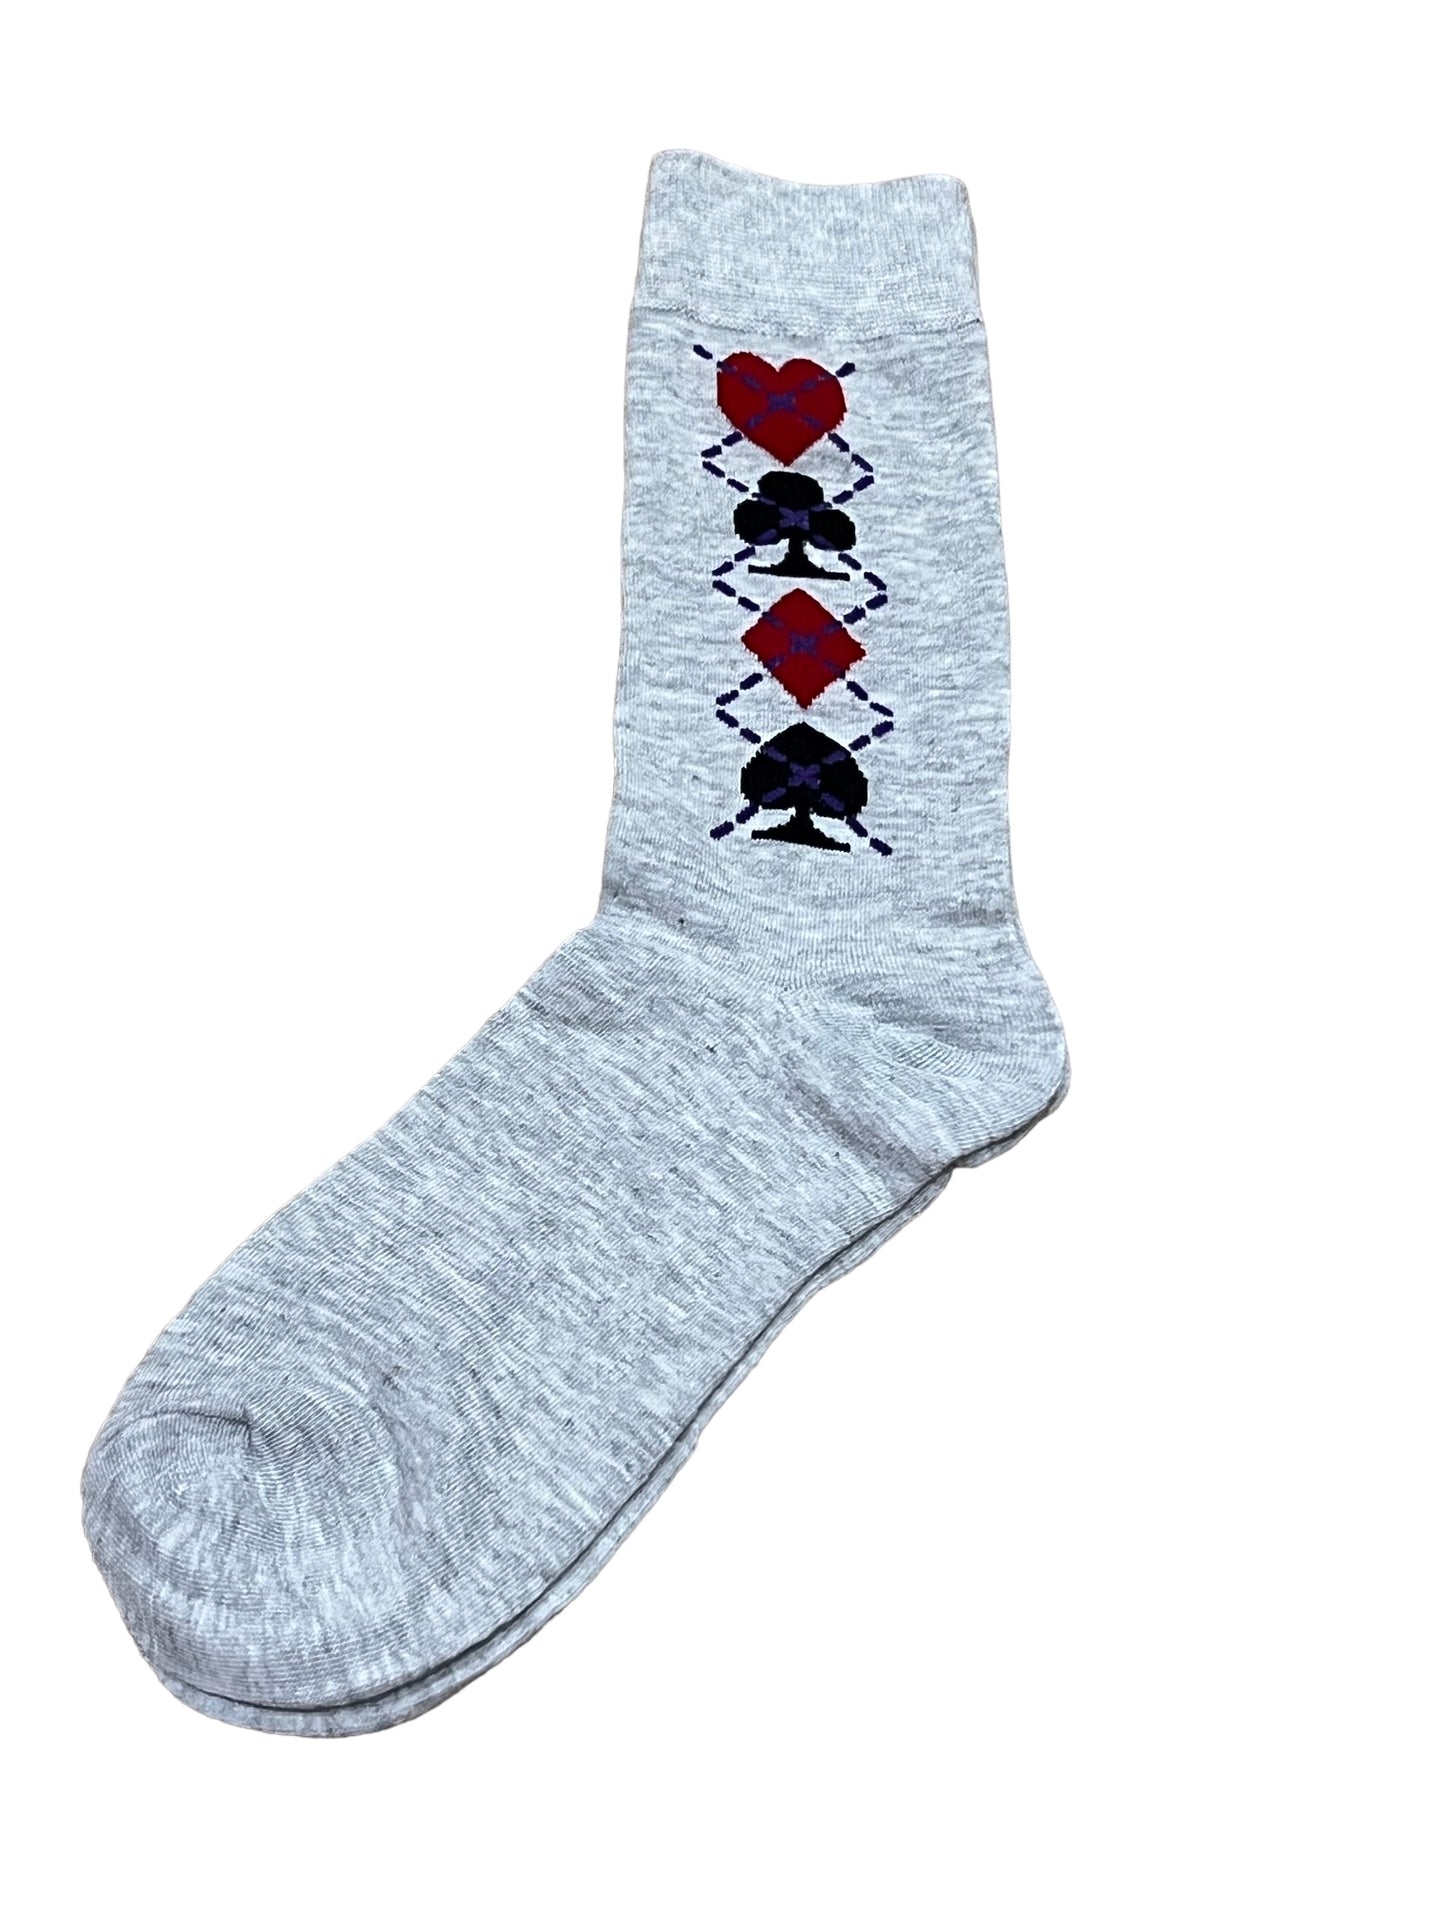 Let's Play Cards! Socks